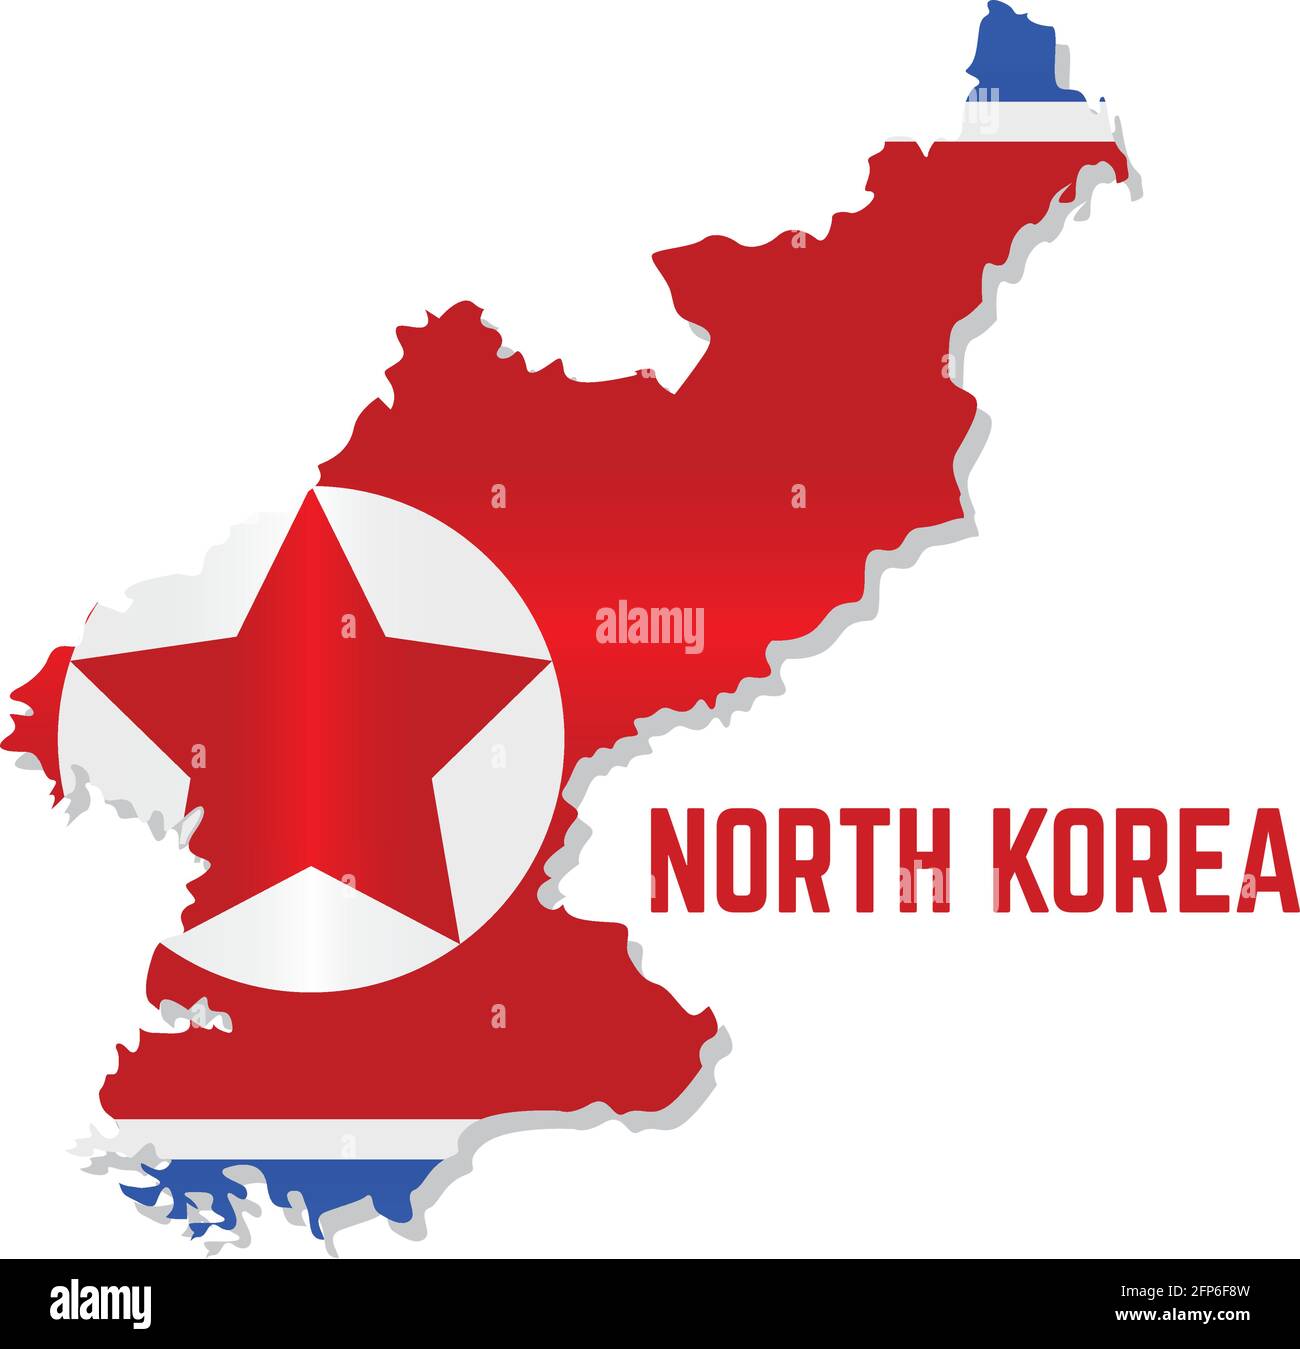 Isolated map with flag of North Korea Vector illustration Stock Vector ...